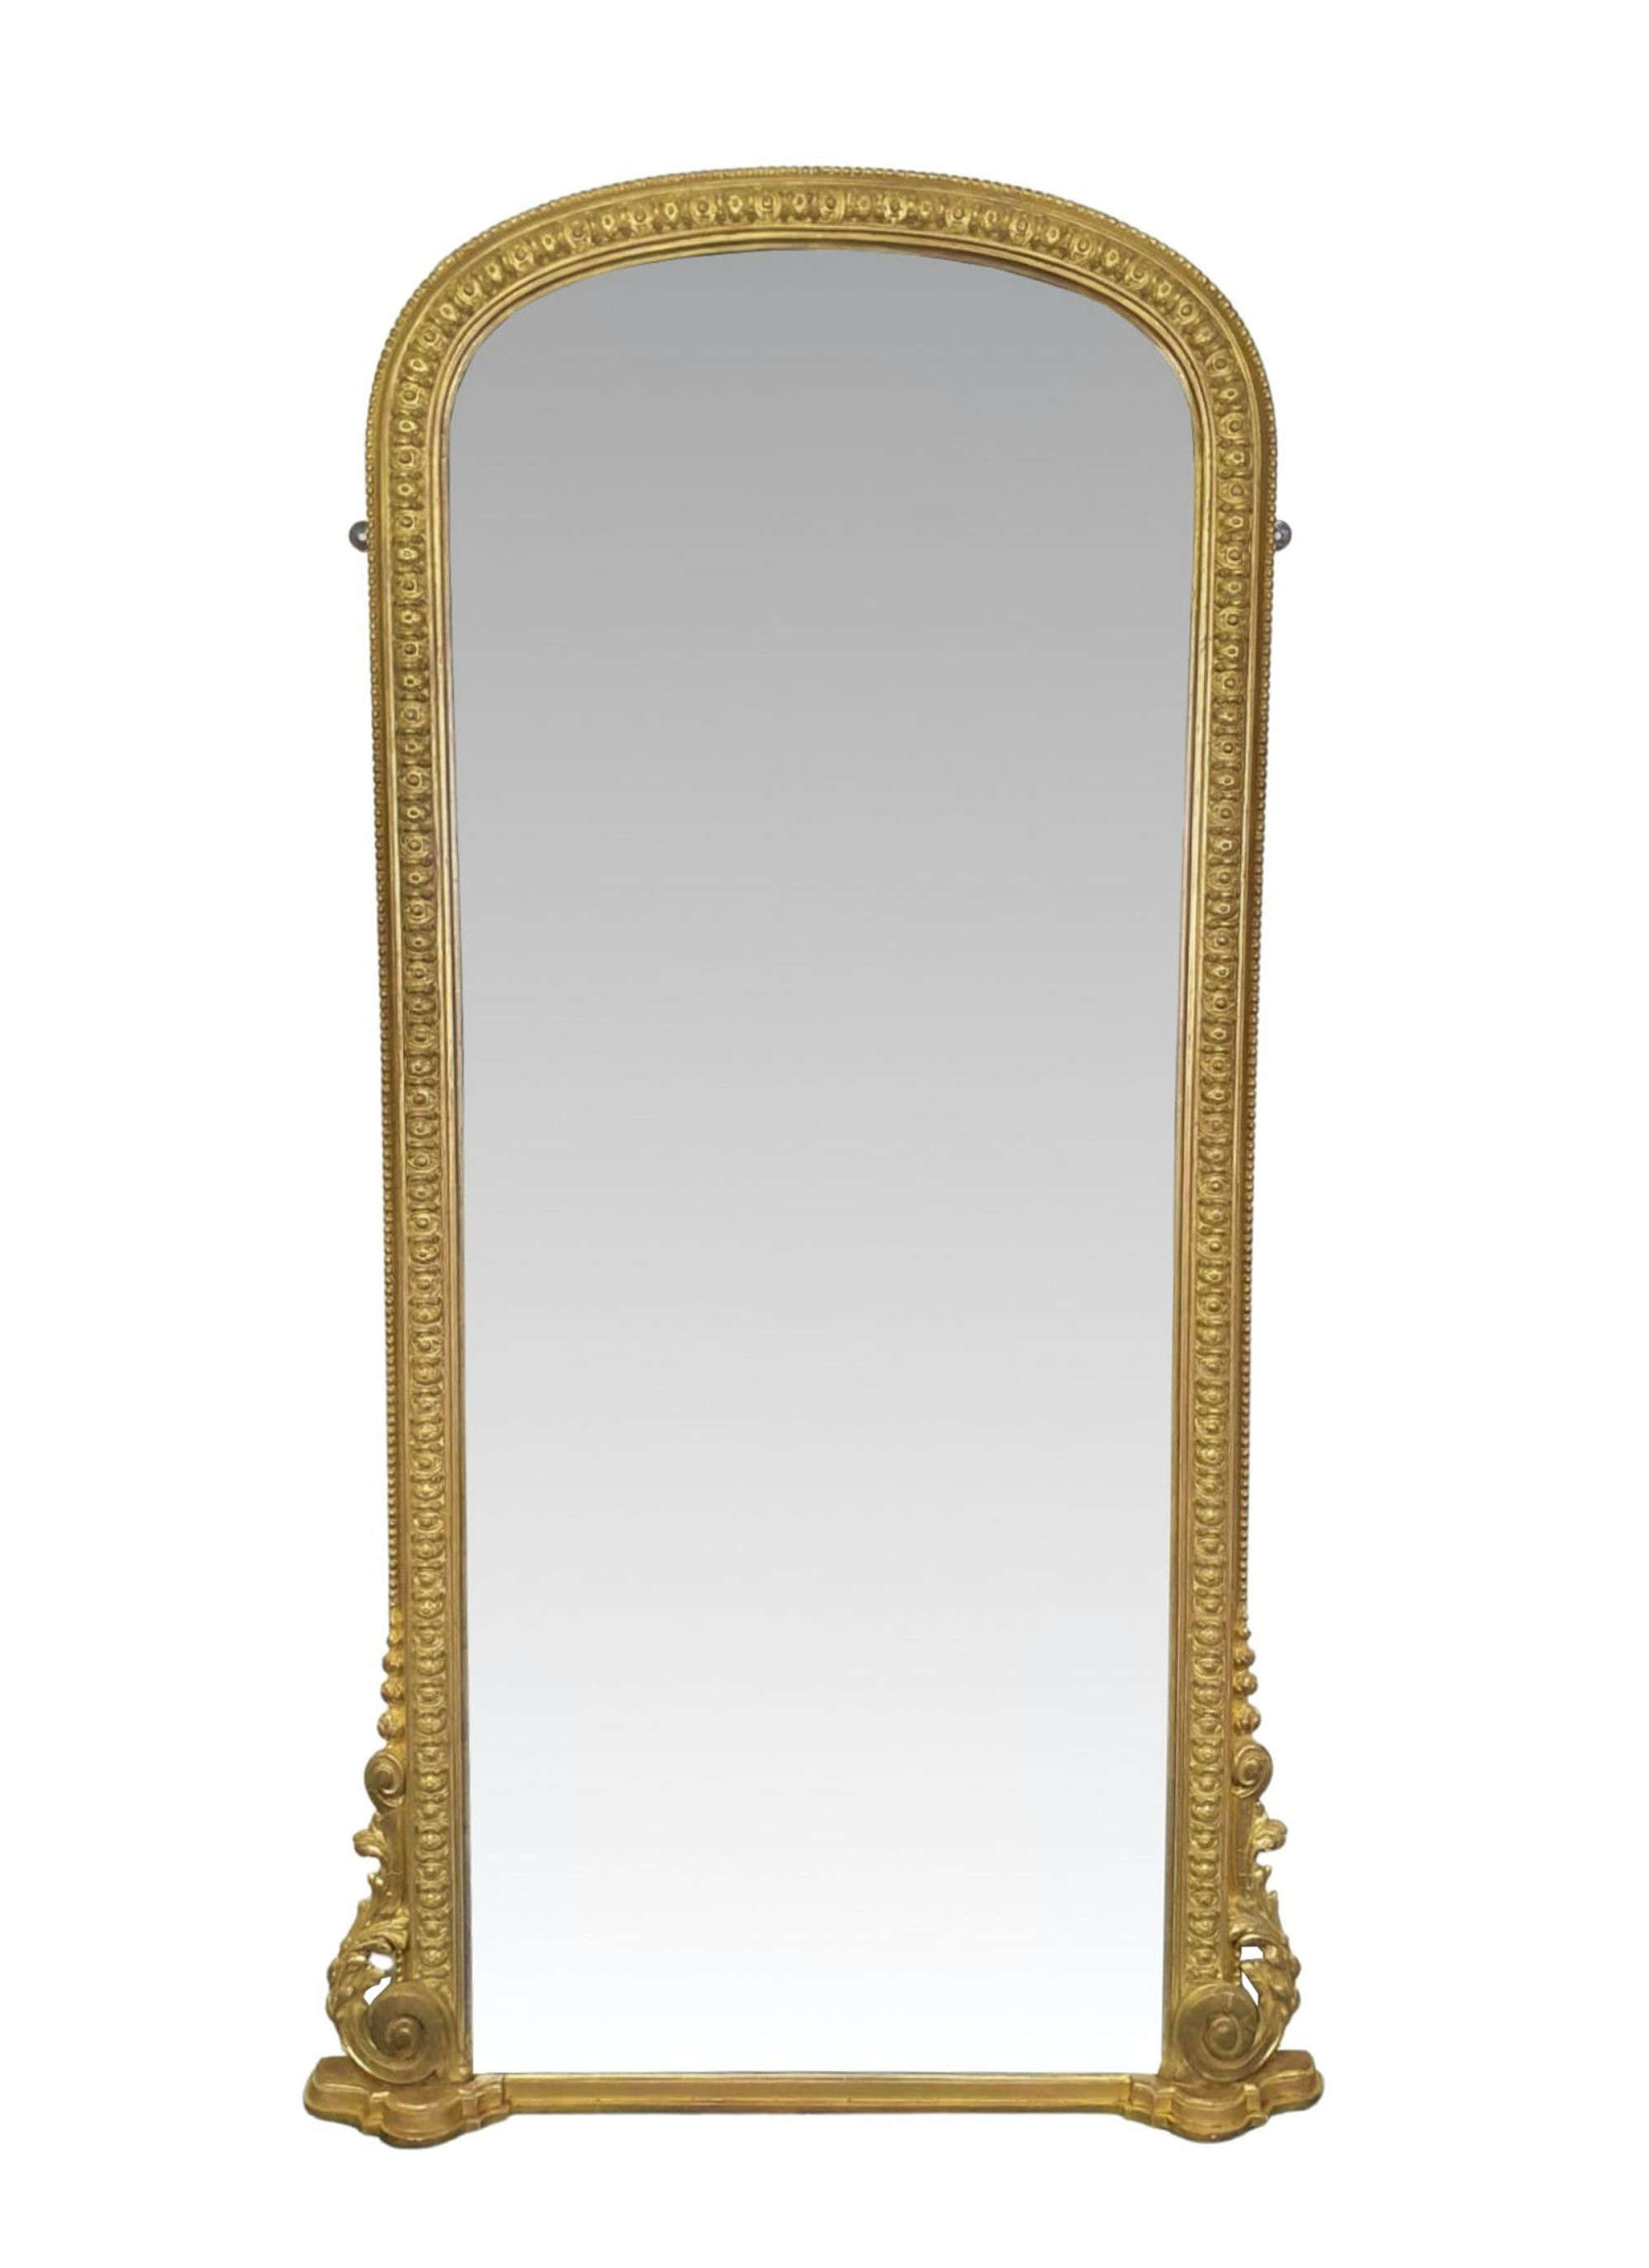 A Gorgeous 19th Century Archtop Tall Pier or Dressing Mirror